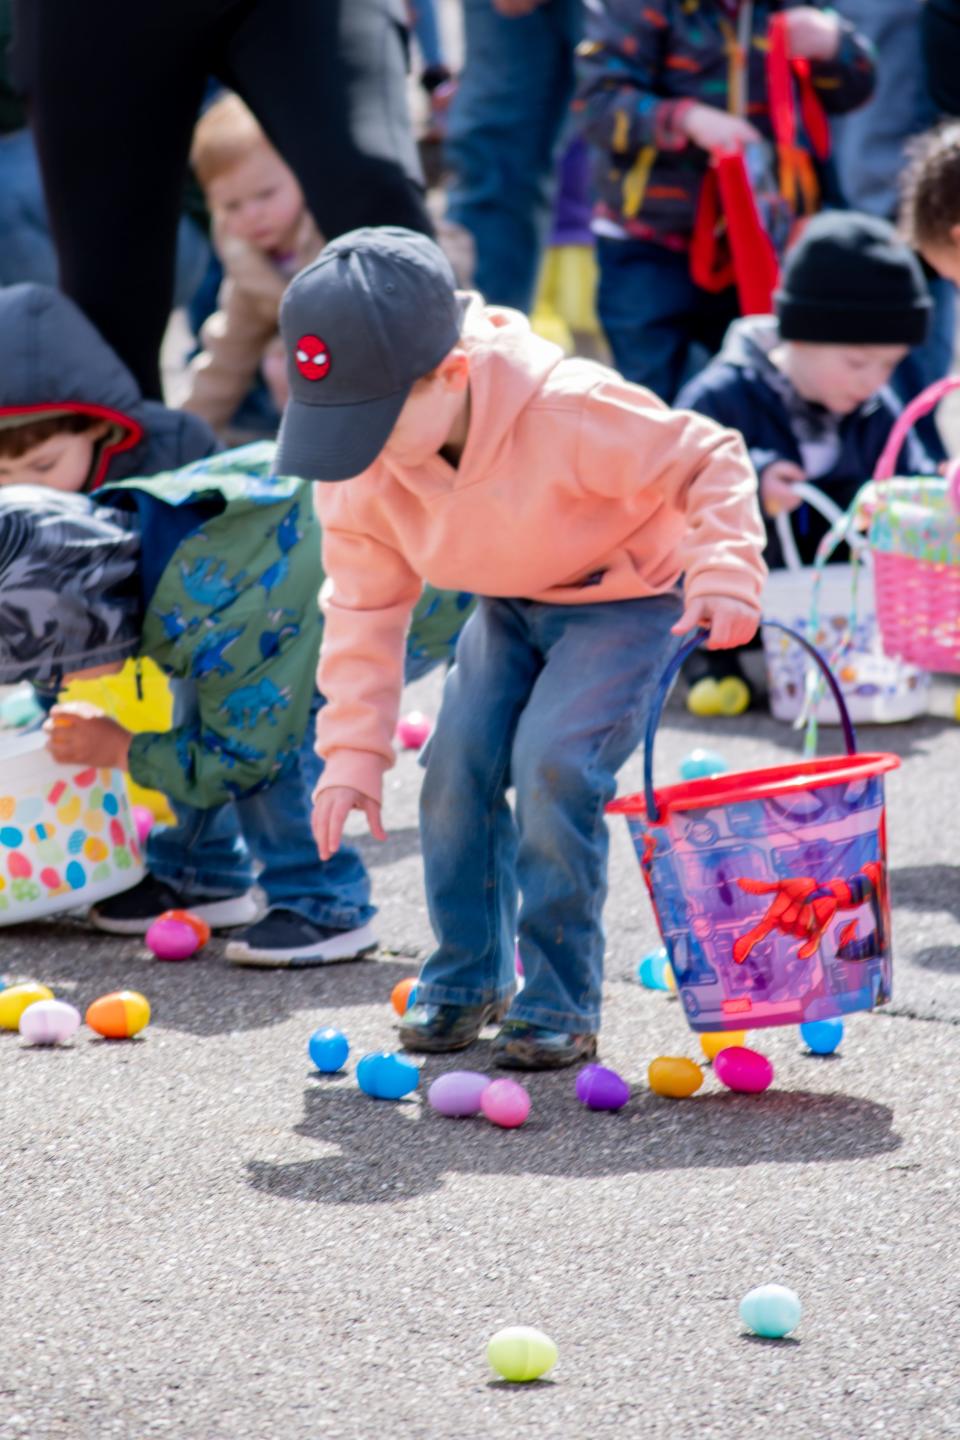 The Guernsey County District Public Library will host an Easter egg hunt on March 16 at the Crossroads Branch.